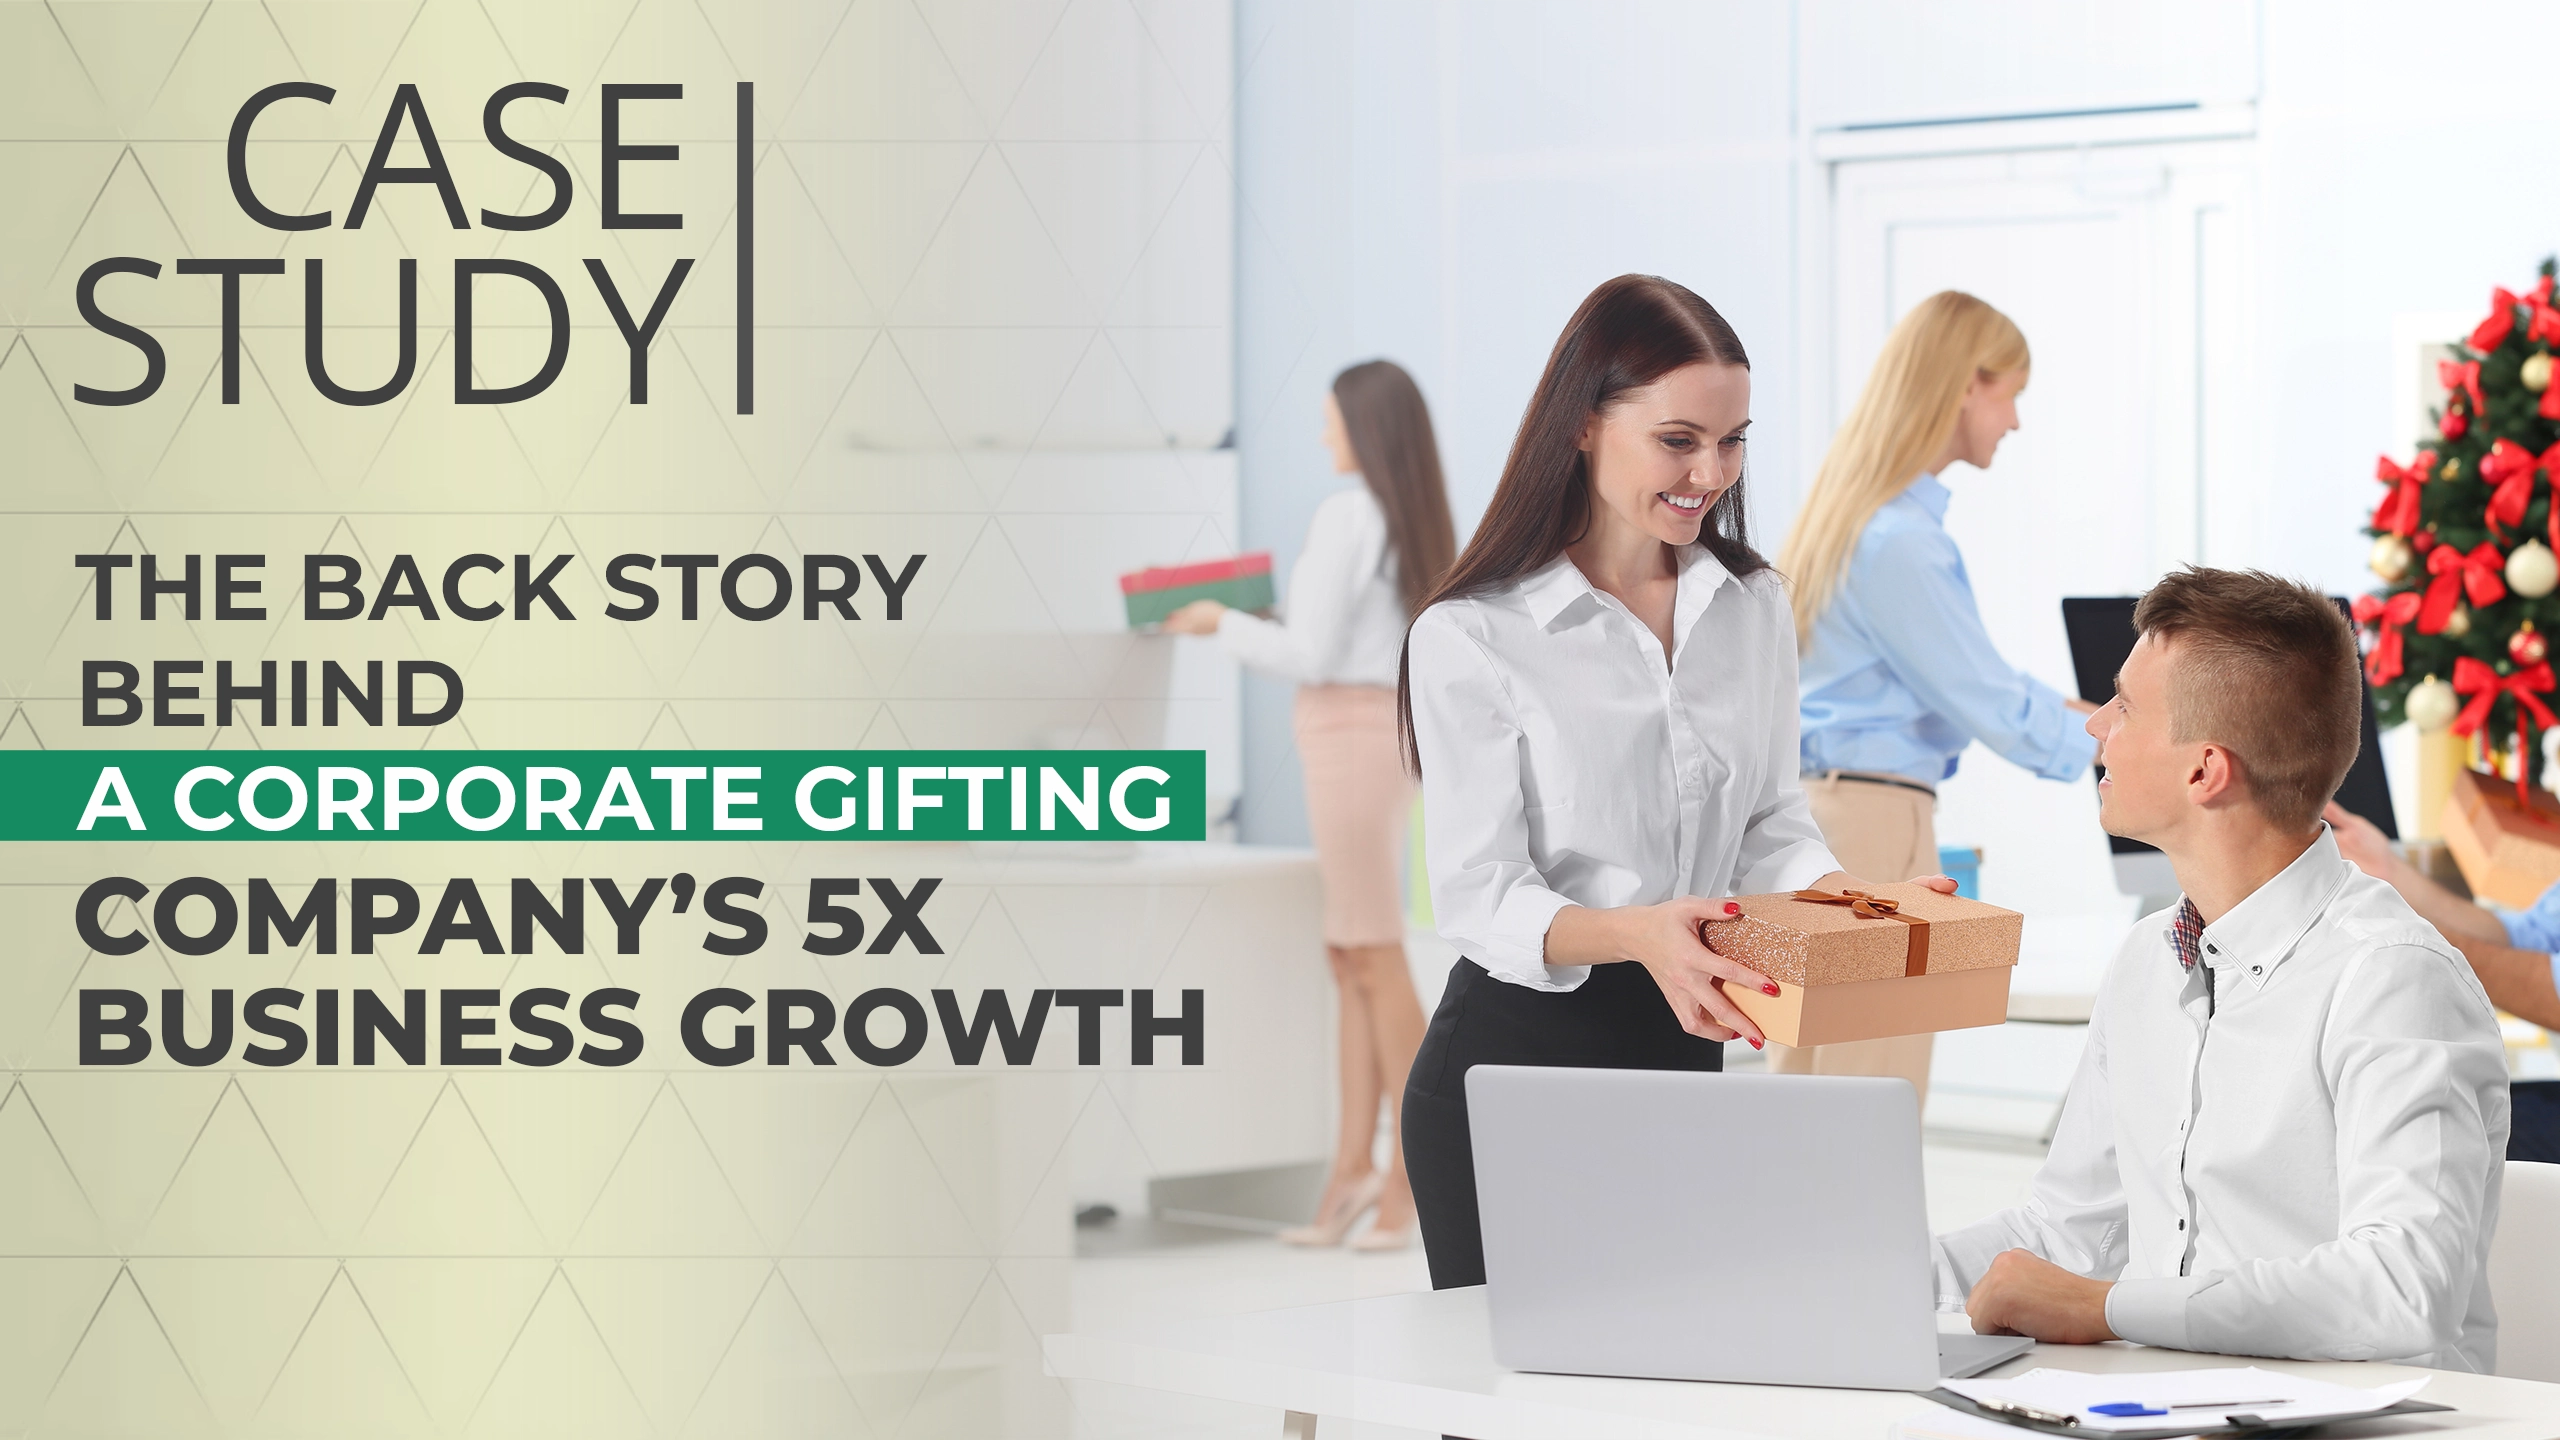 the-back-story-behind-a-corporate-gifting-companys-5x-business-growth-featured-banner